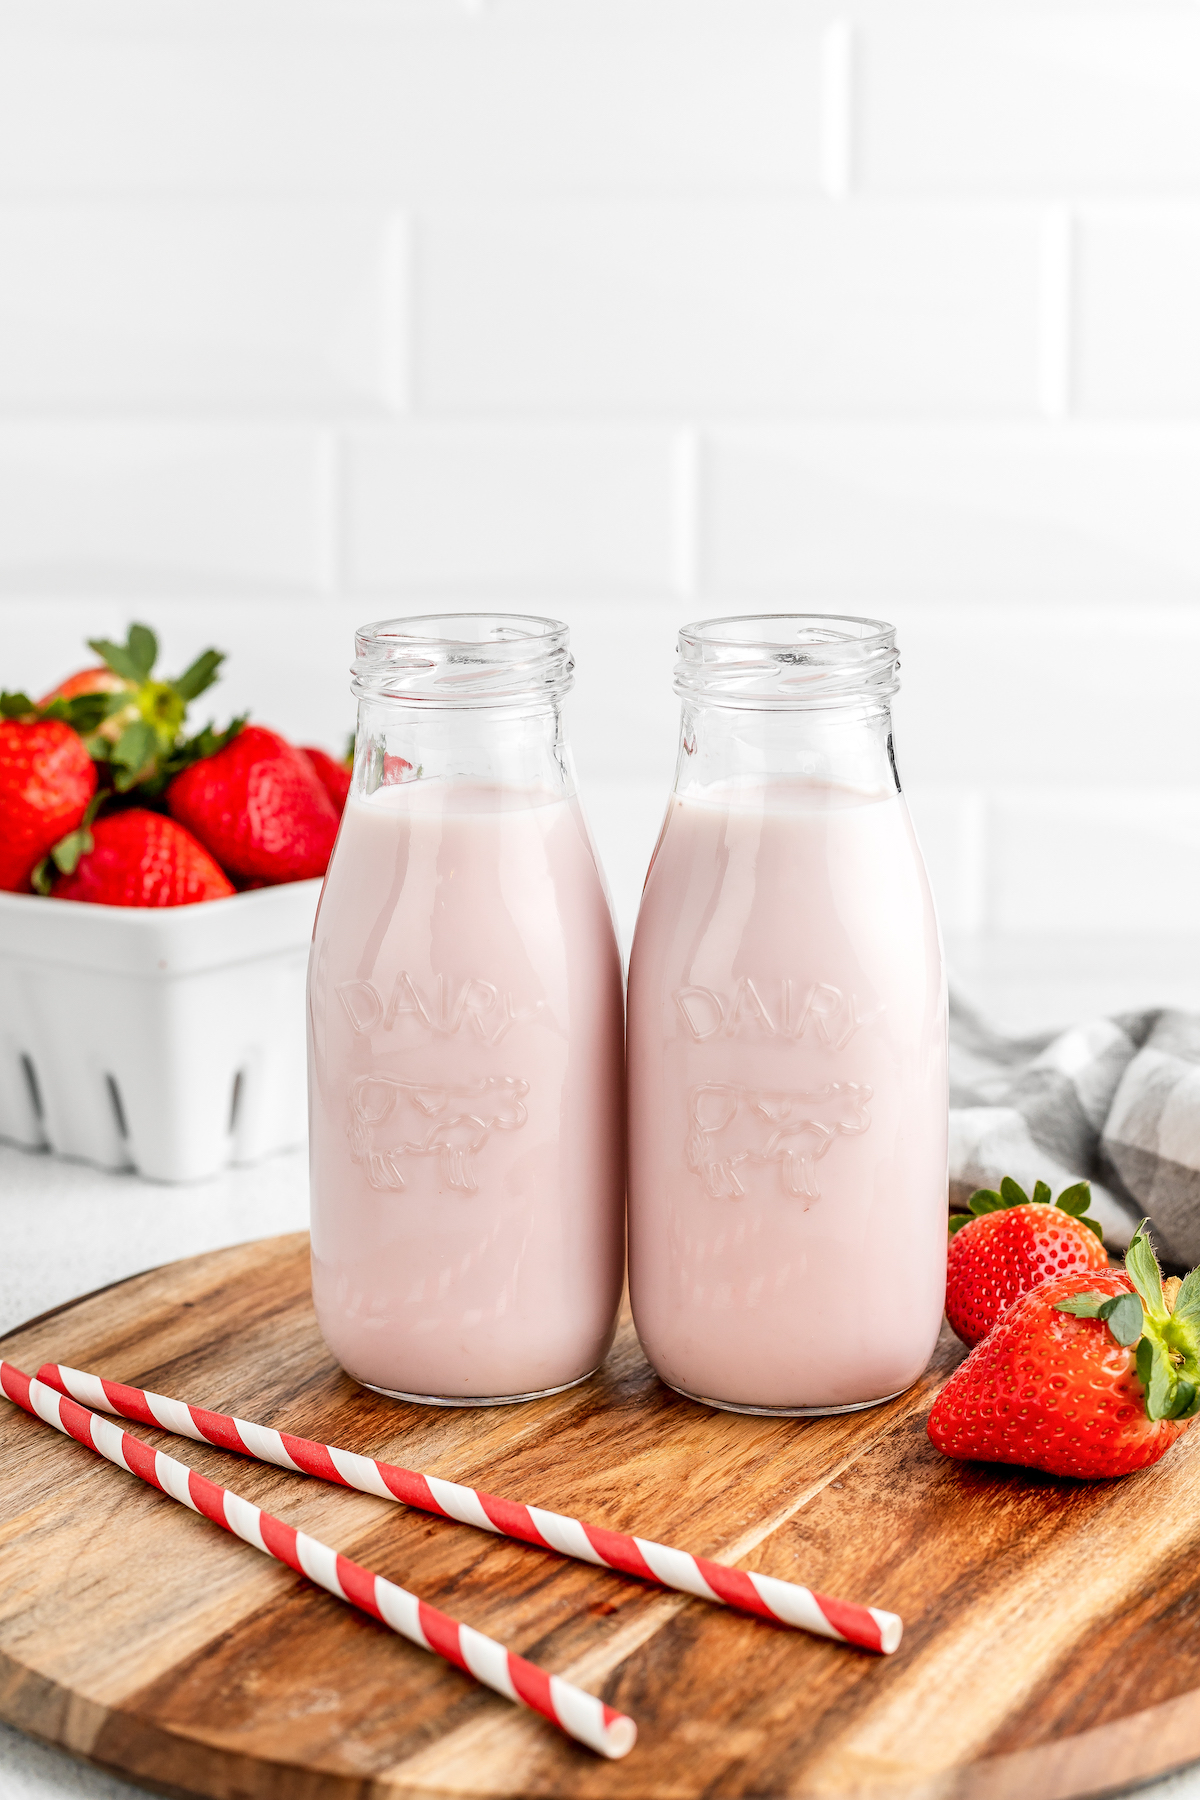 Pale pink milk in two small glass milk jars. Strawberries and paper straws are on the table as well.